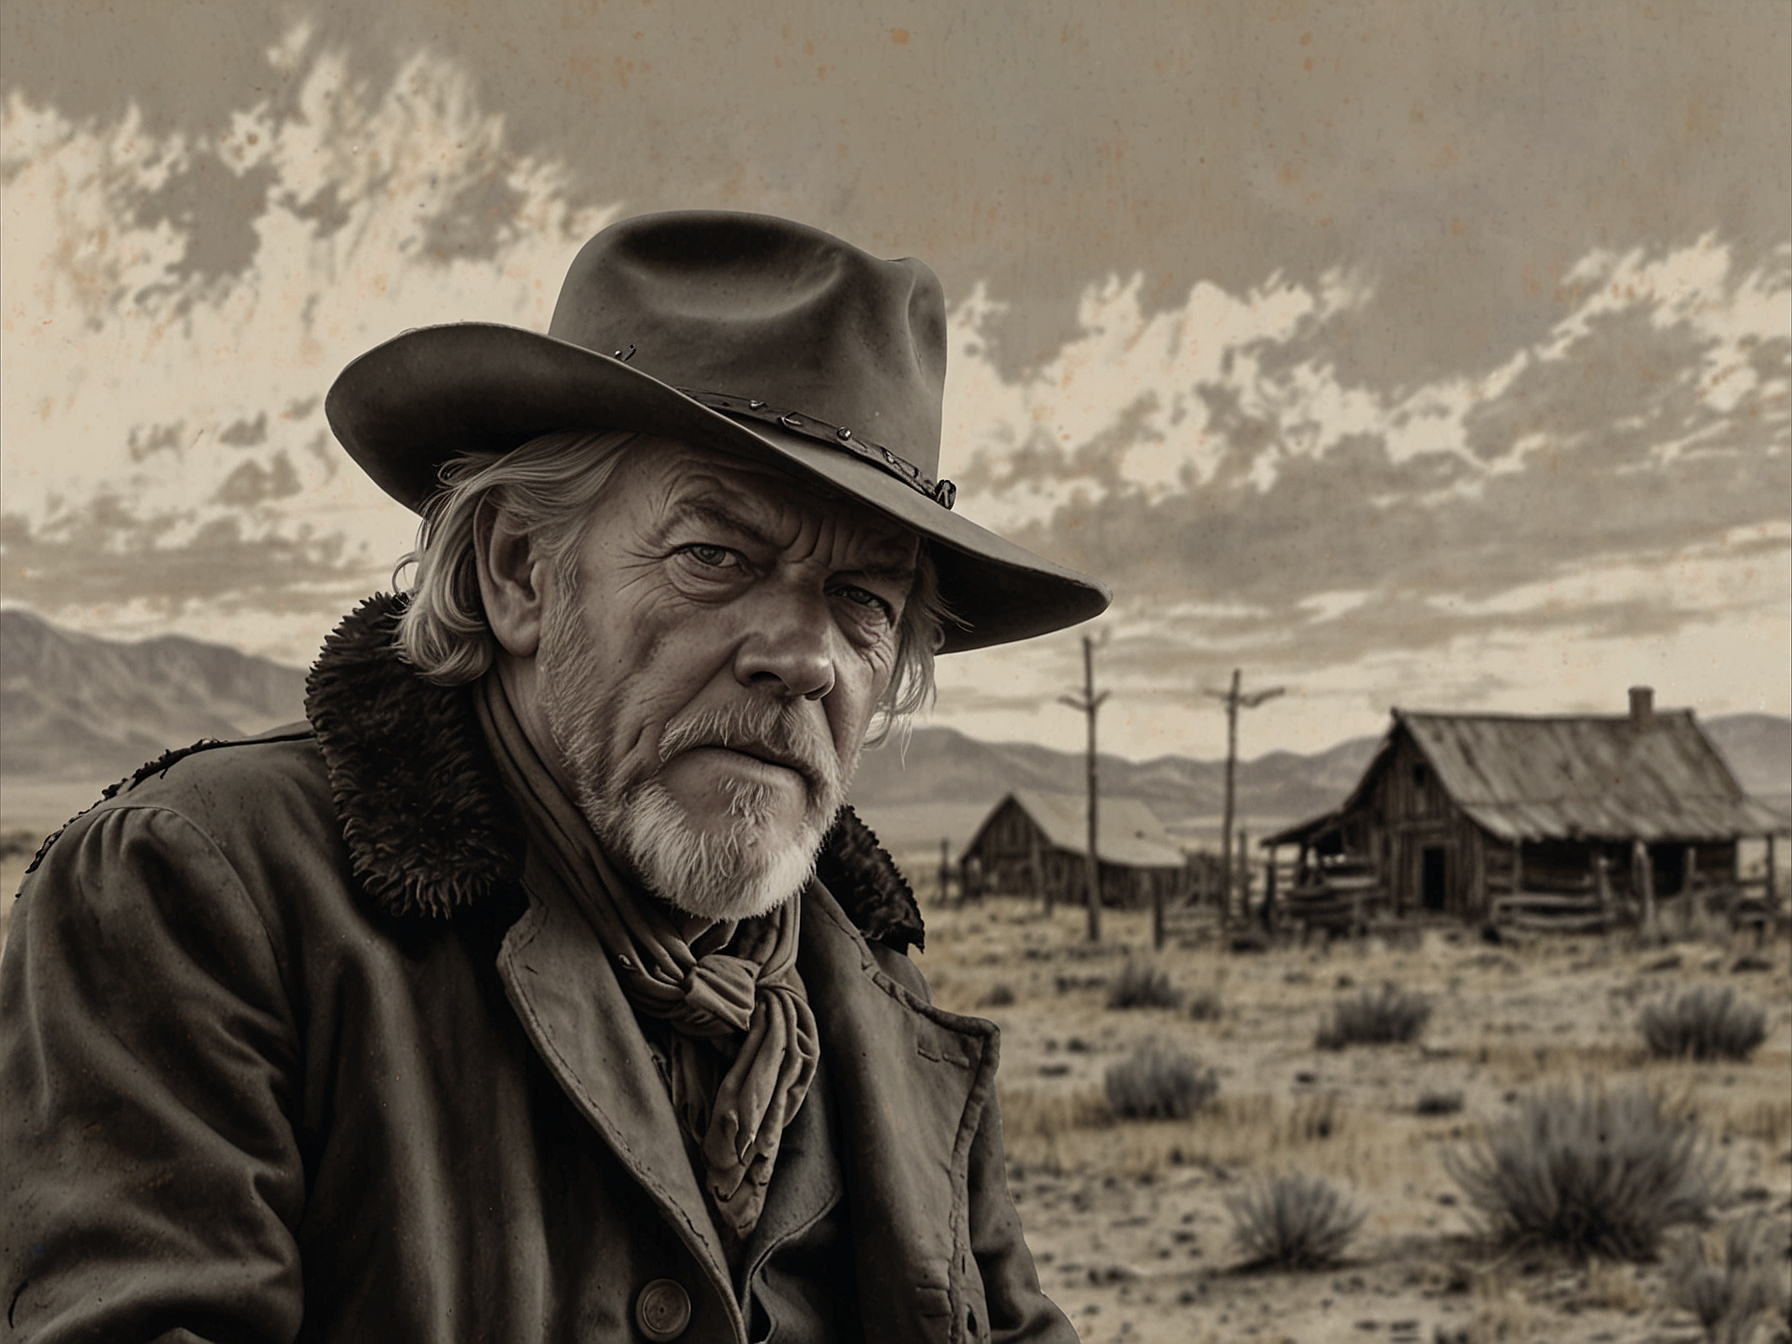 Donald Sutherland and Kiefer Sutherland on the set of 'Forsaken,' portraying their characters in a tense father-son reunion amid the rugged 1872 Wyoming landscape.